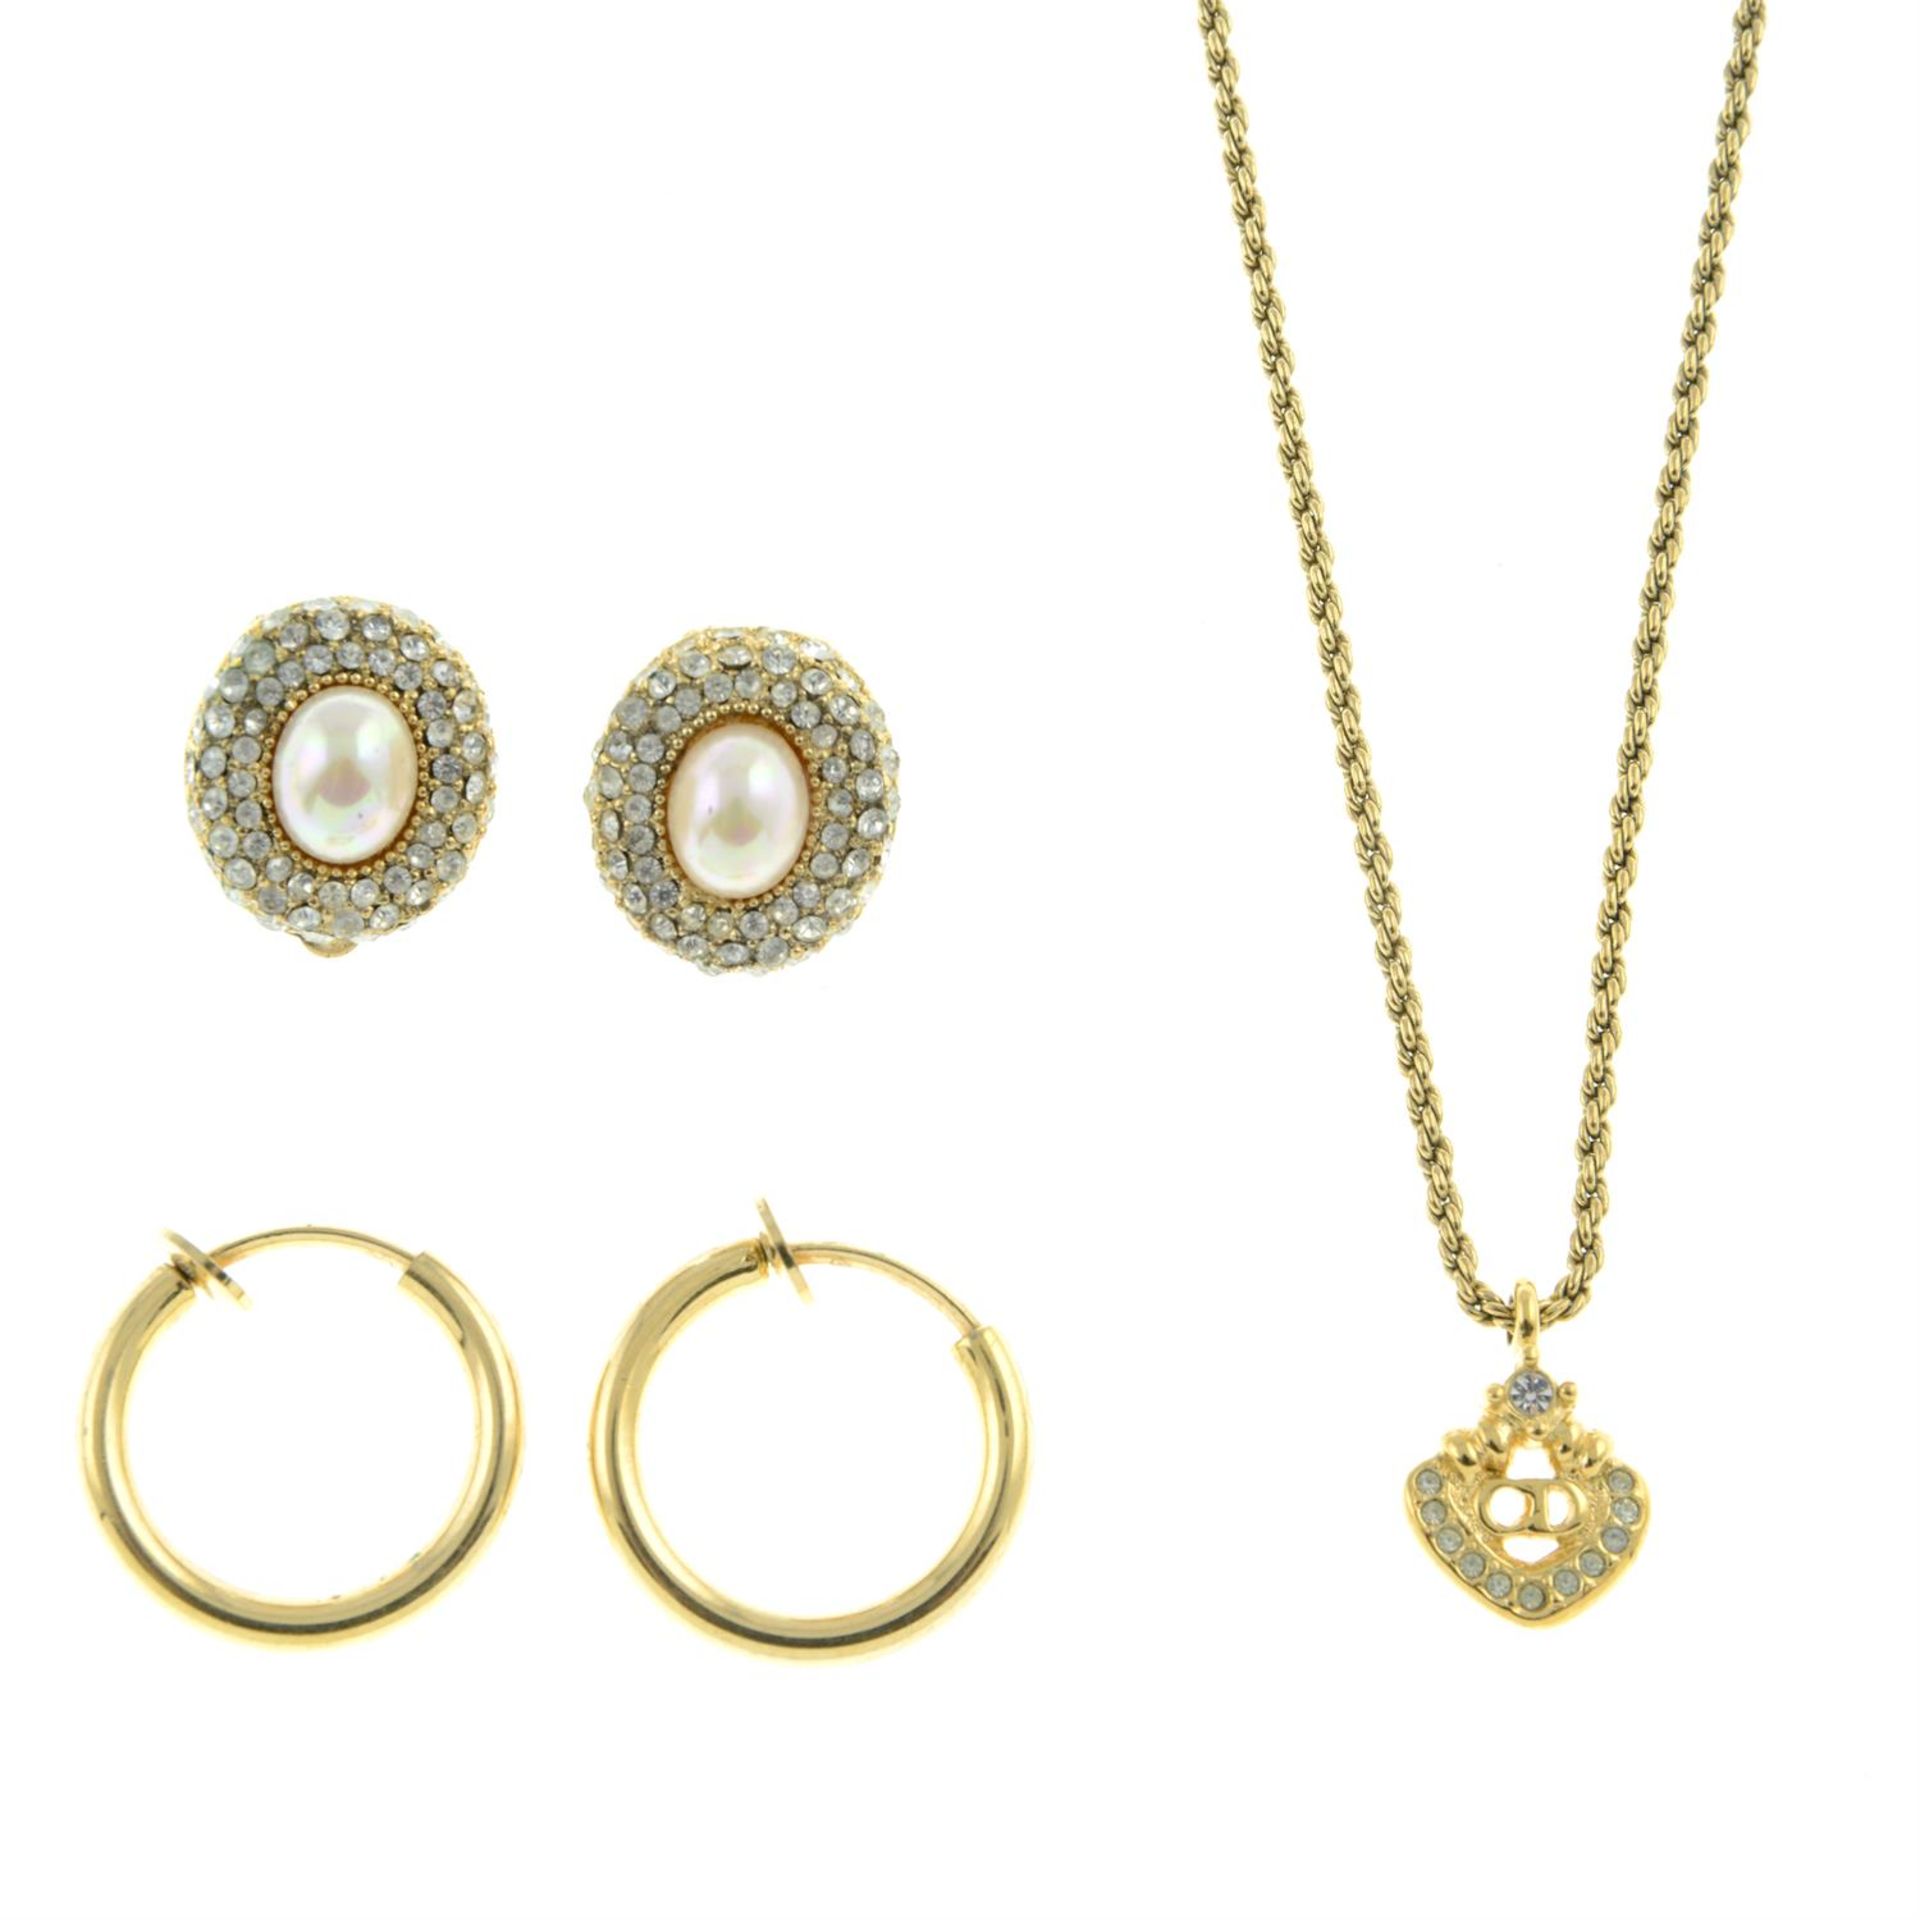 Christian Dior - two pairs of clip on earrings and necklace.